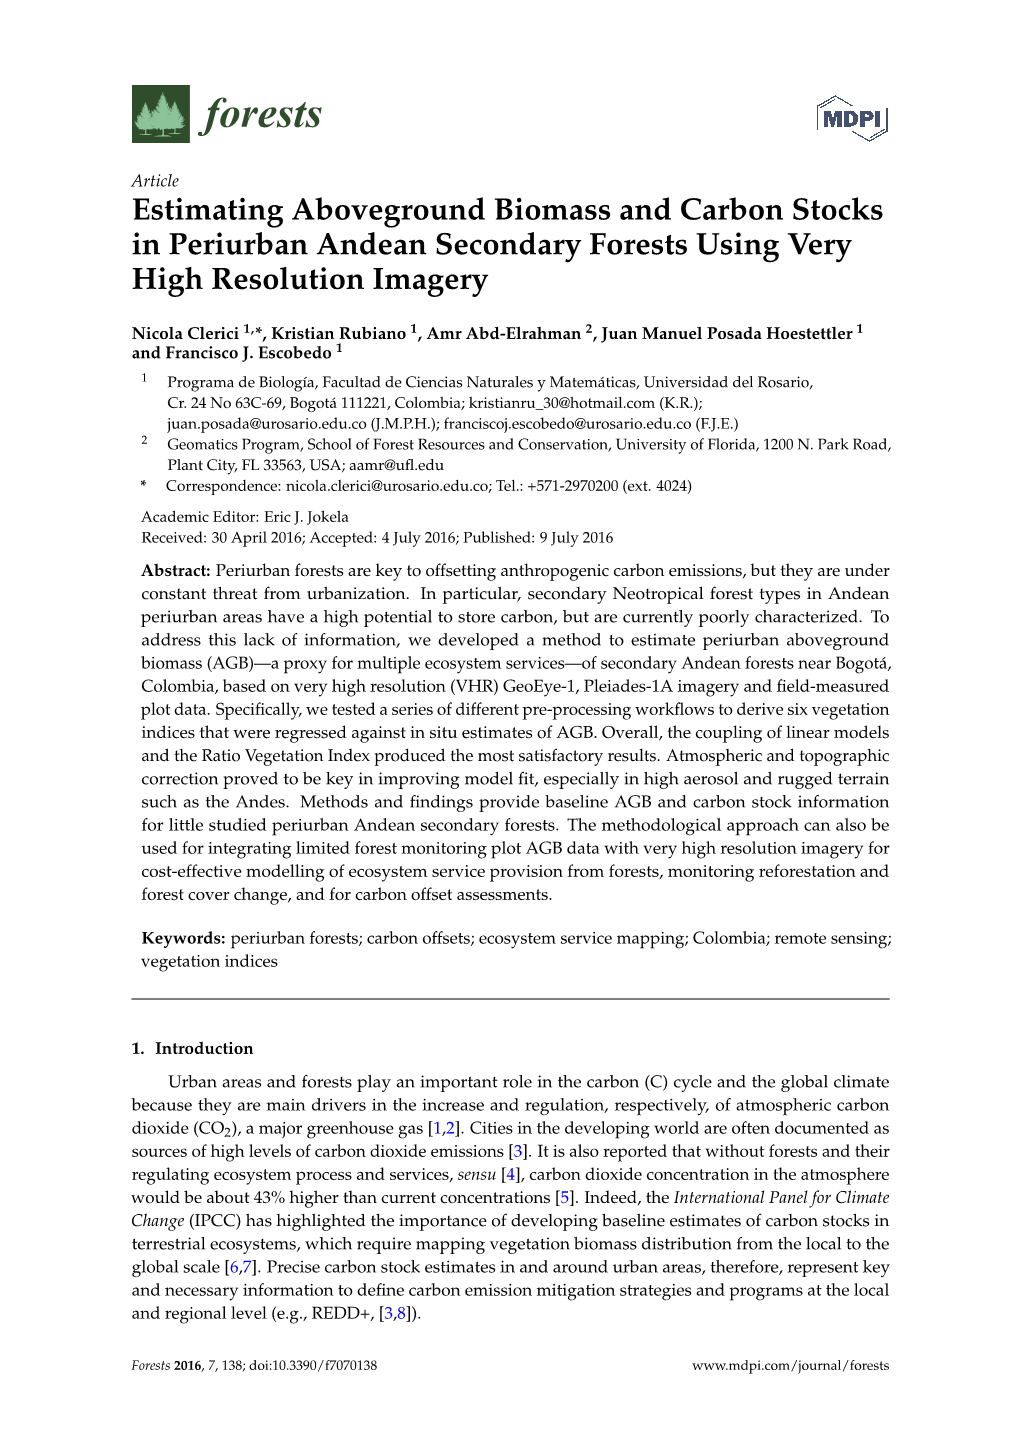 Estimating Aboveground Biomass and Carbon Stocks in Periurban Andean Secondary Forests Using Very High Resolution Imagery